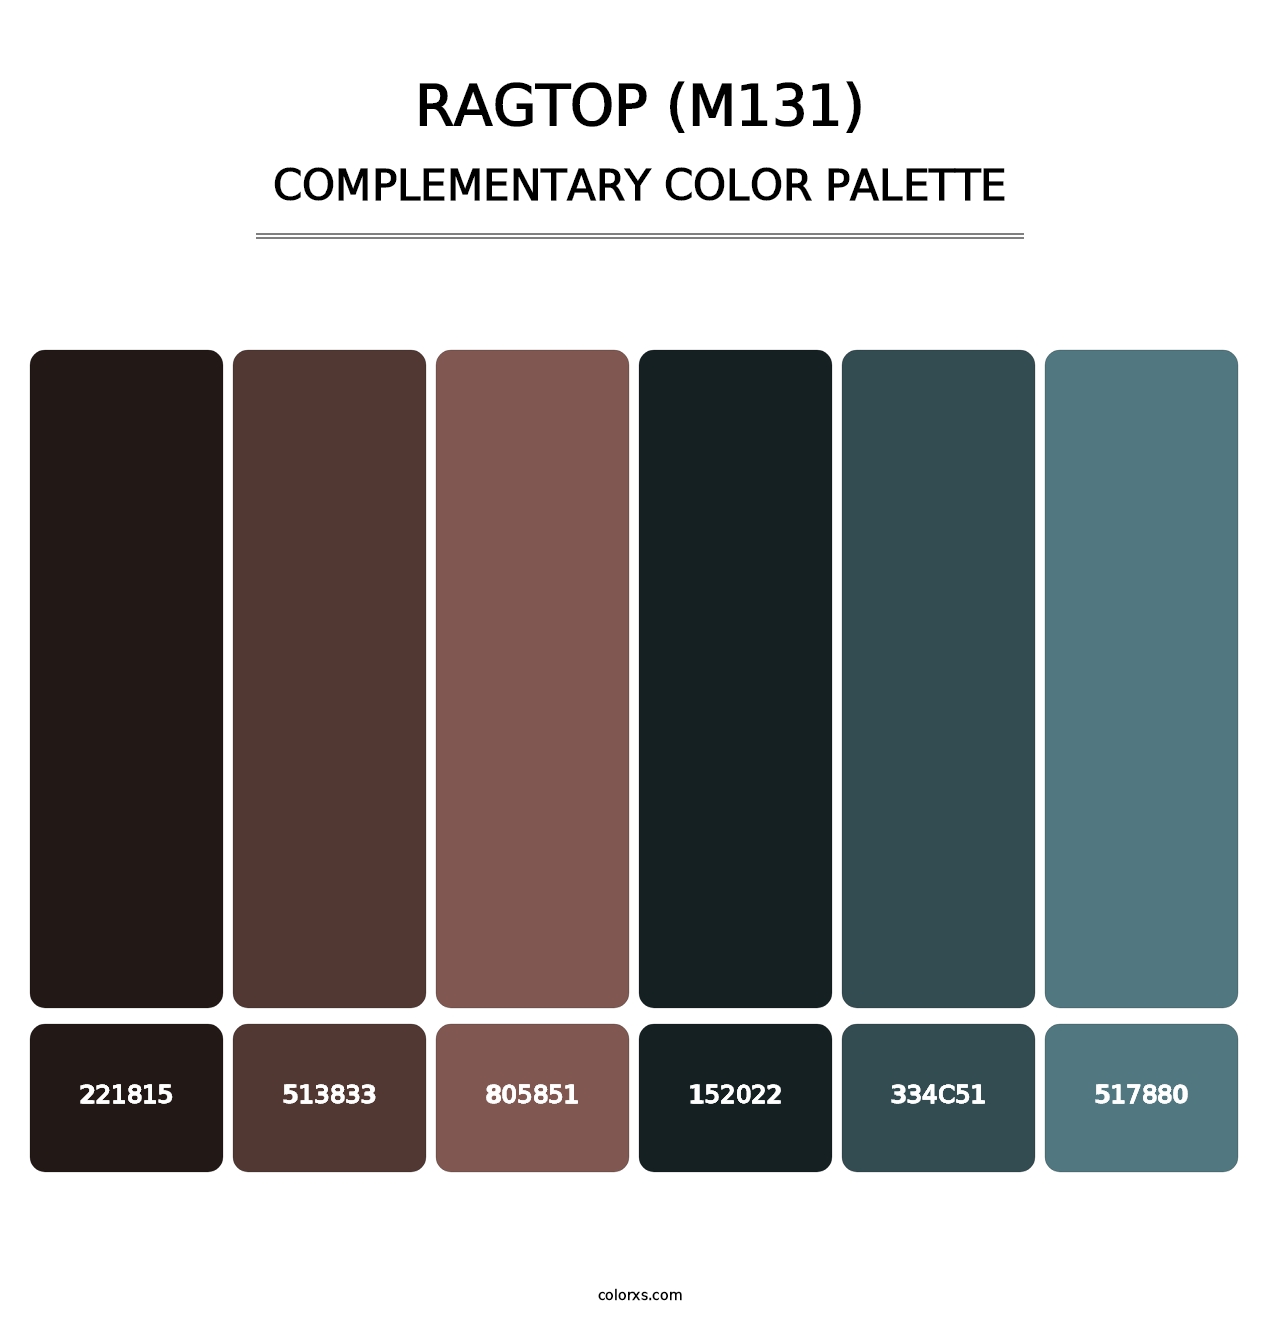 Ragtop (M131) - Complementary Color Palette